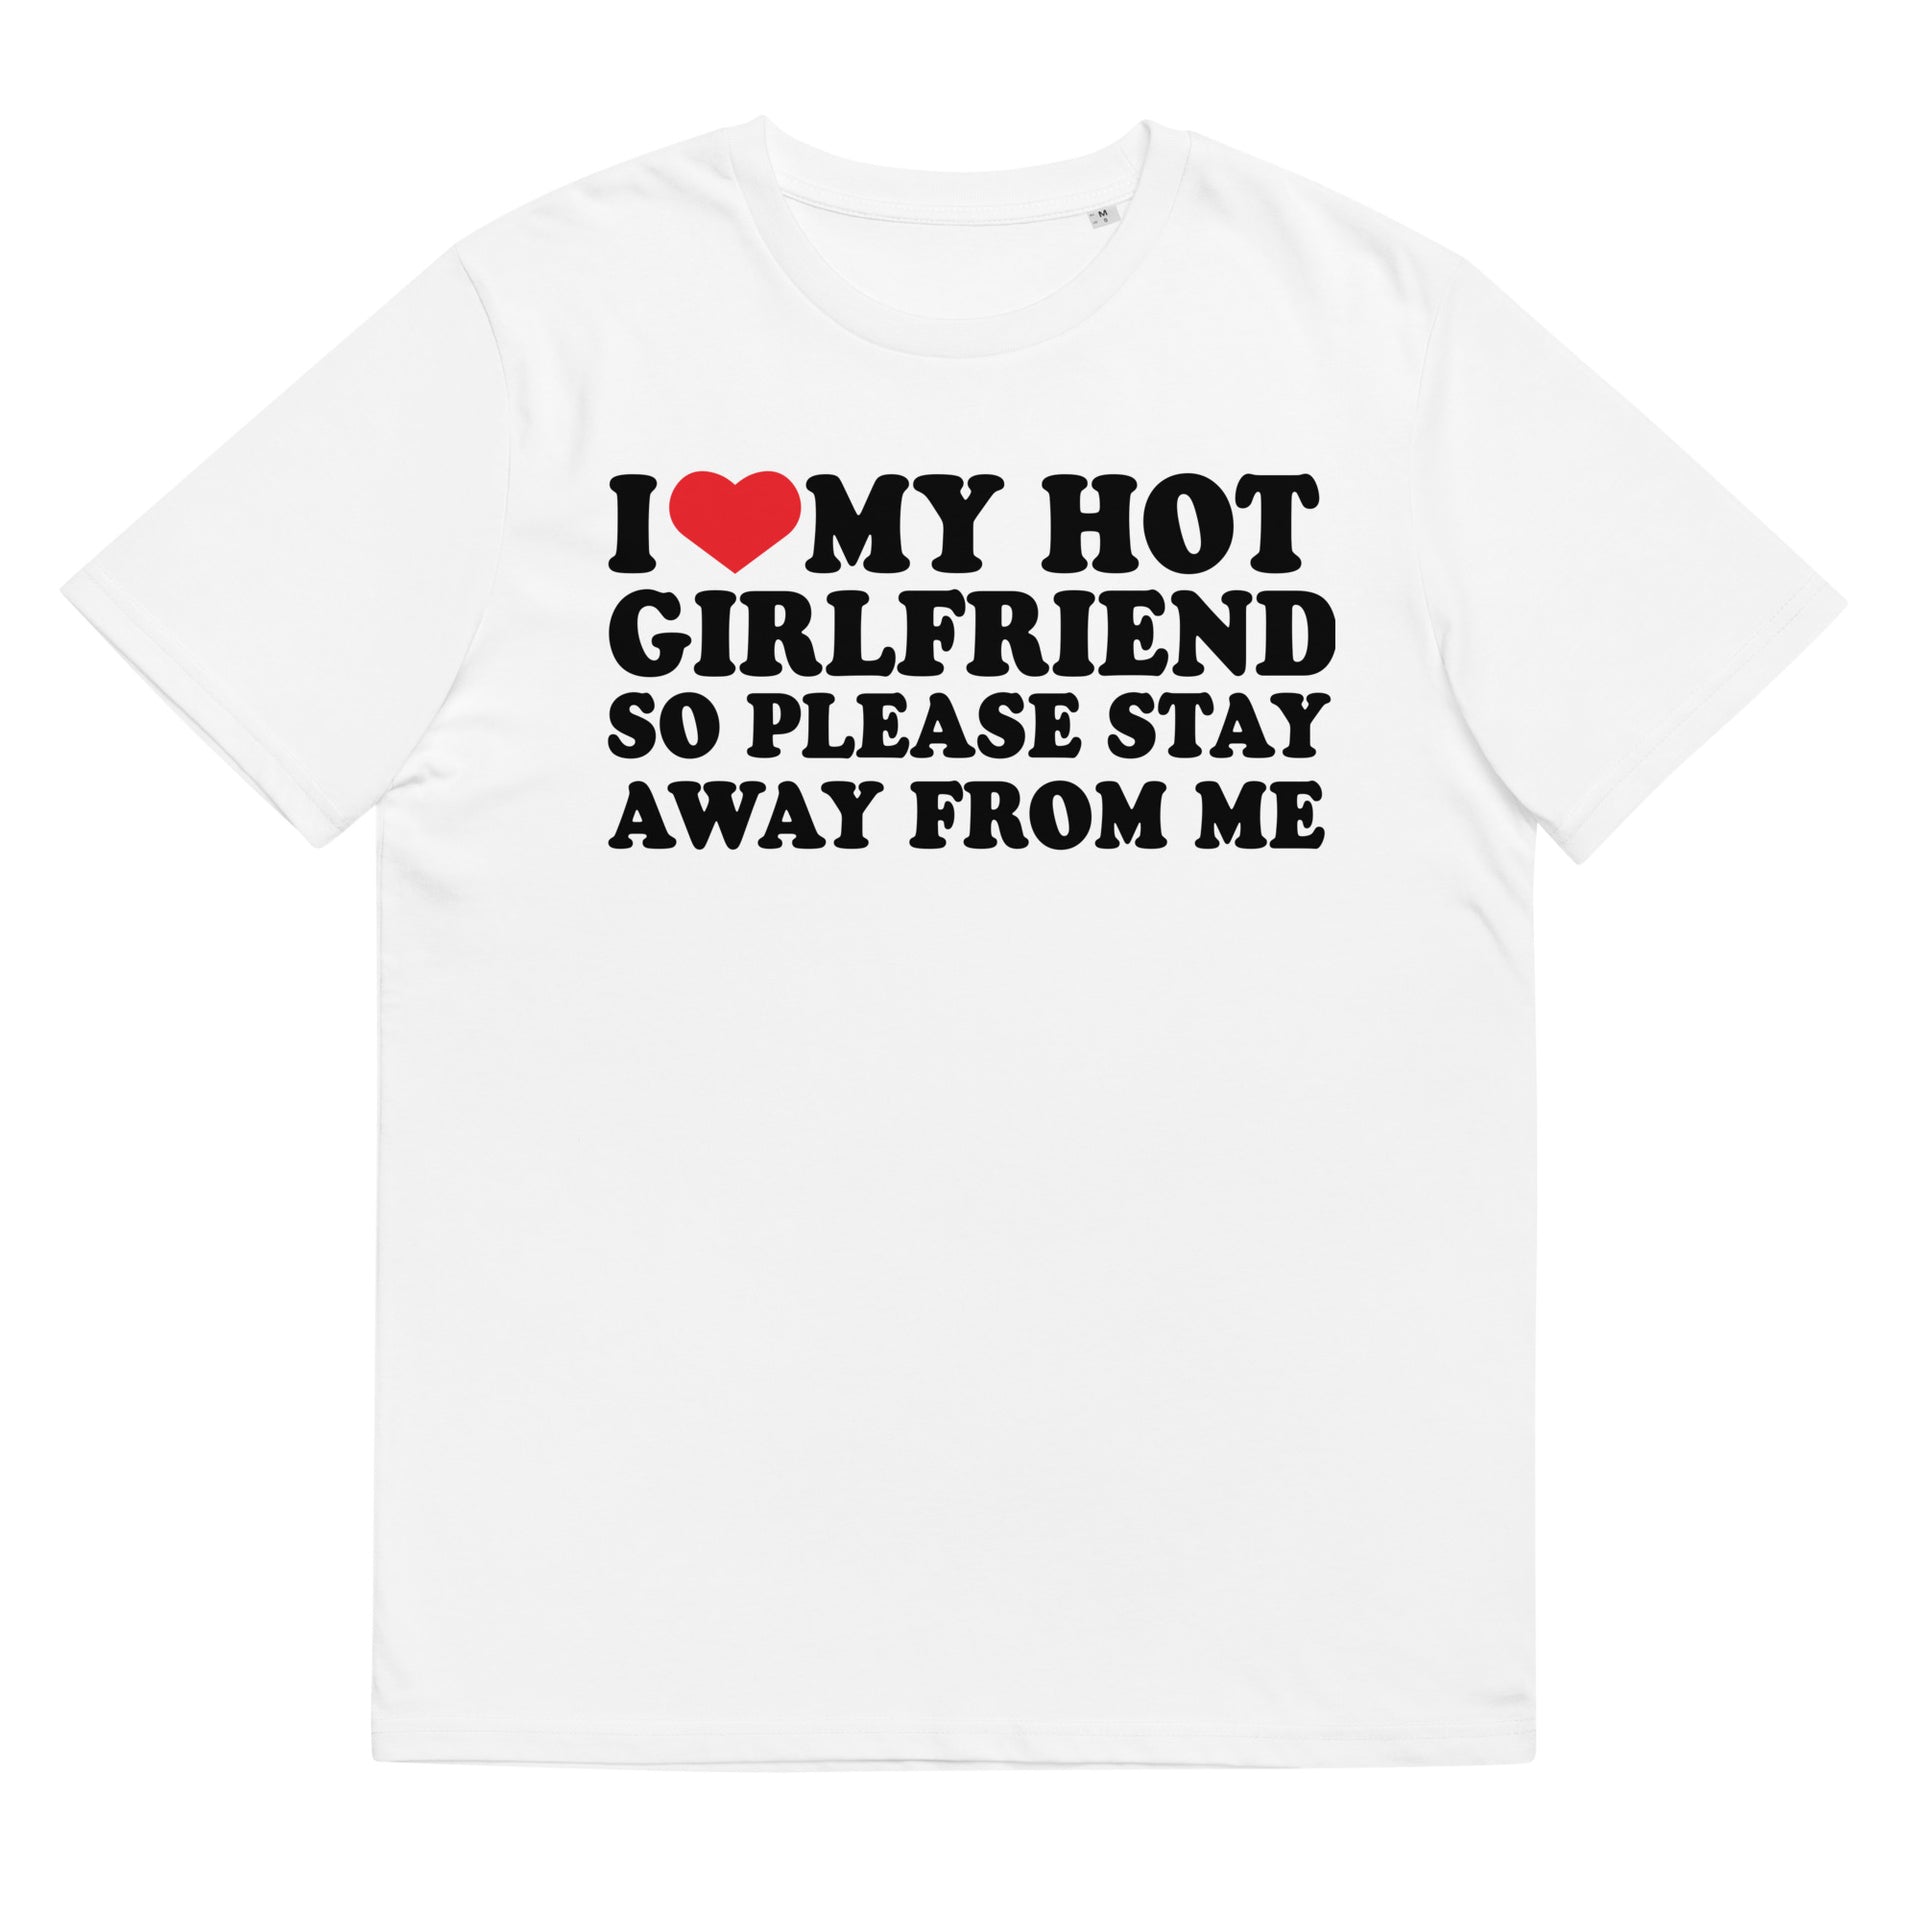 I LOVE MY HOT GIRLFRIEND SO PLEASE STAY AWAY FROM ME Unisex t